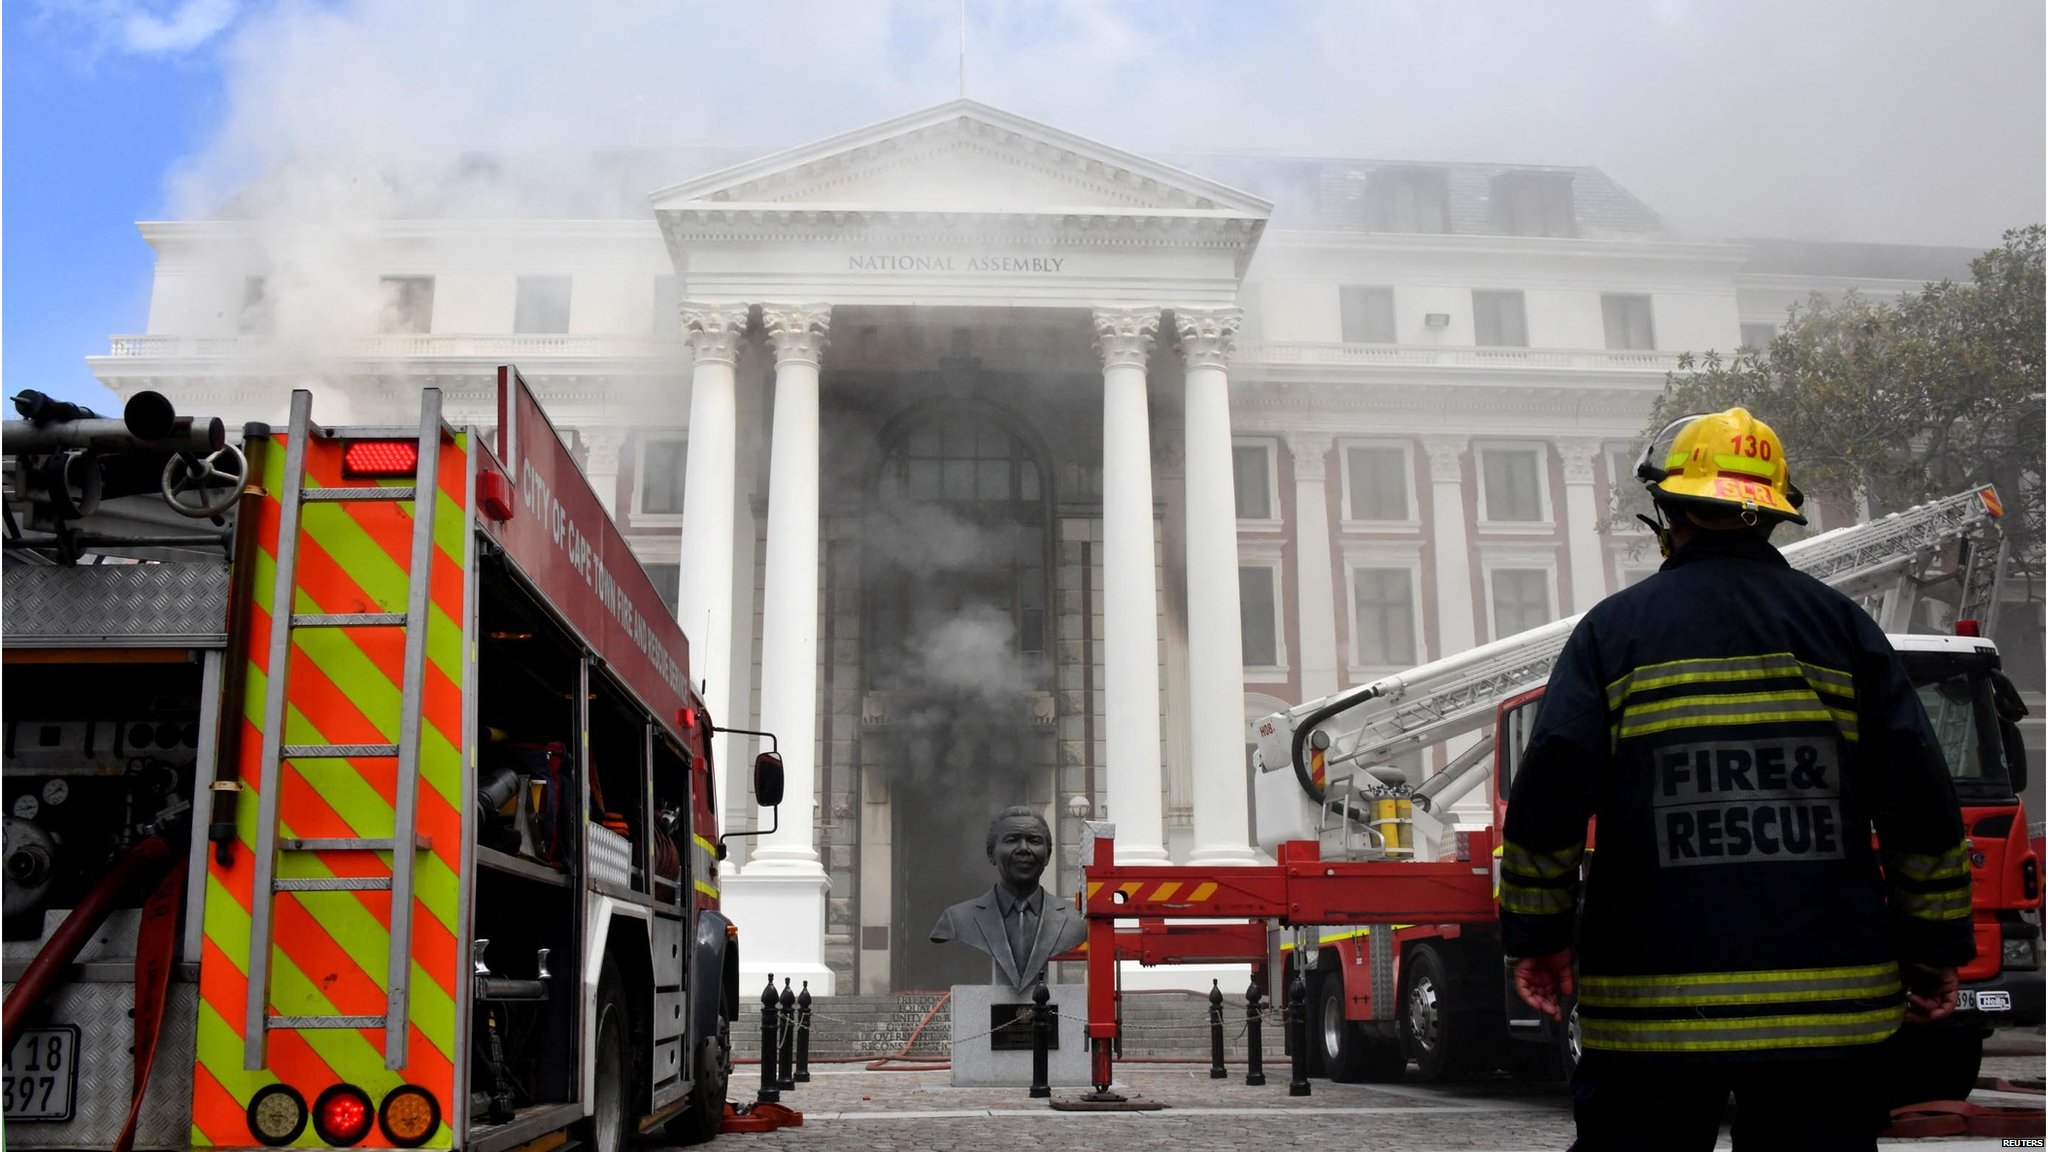 South Africa parliament: Man arrested over massive fire